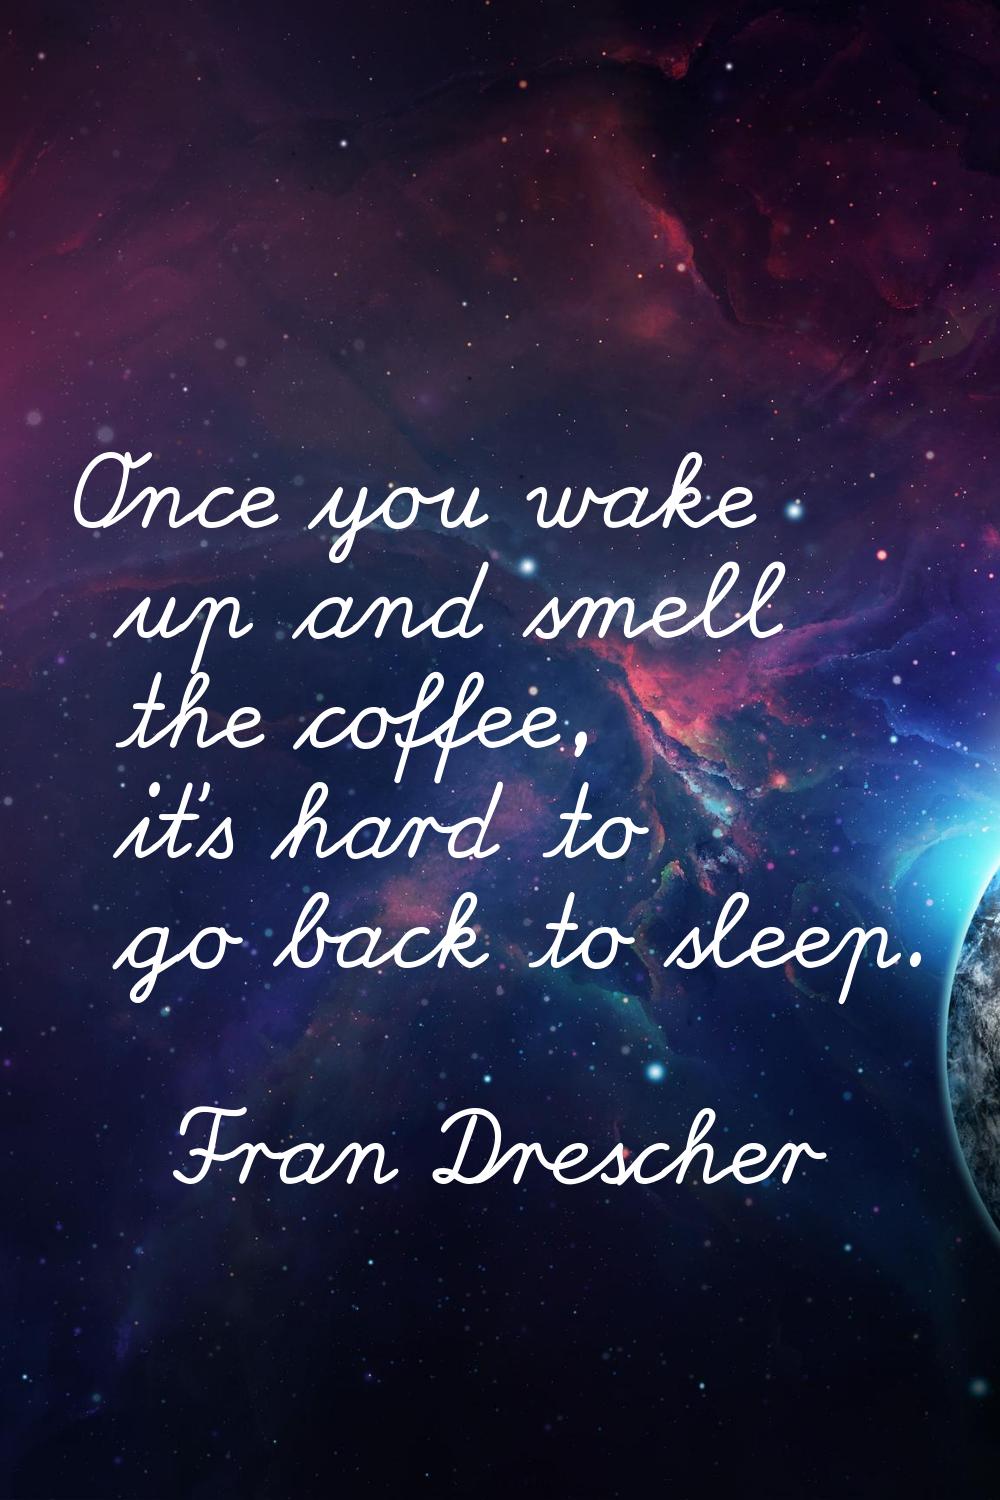 Once you wake up and smell the coffee, it's hard to go back to sleep.